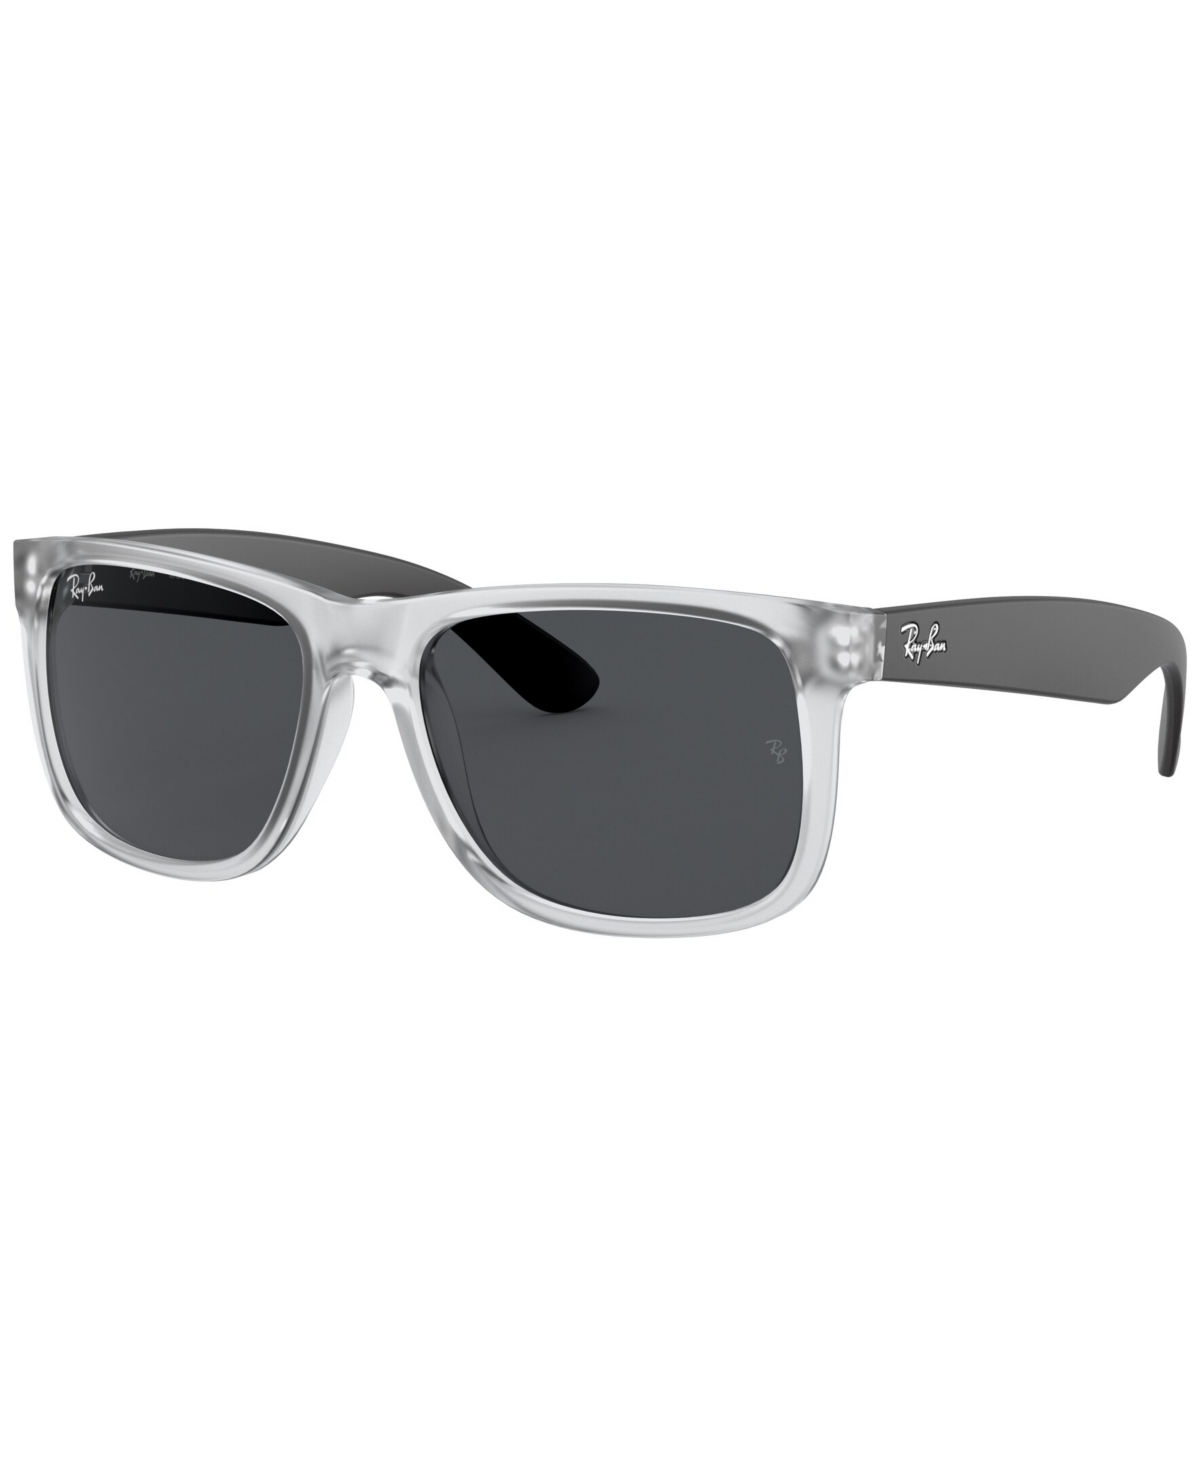 Ray Ban Unisex Sunglasses, Rb4165 Justin Color Mix In Transparent